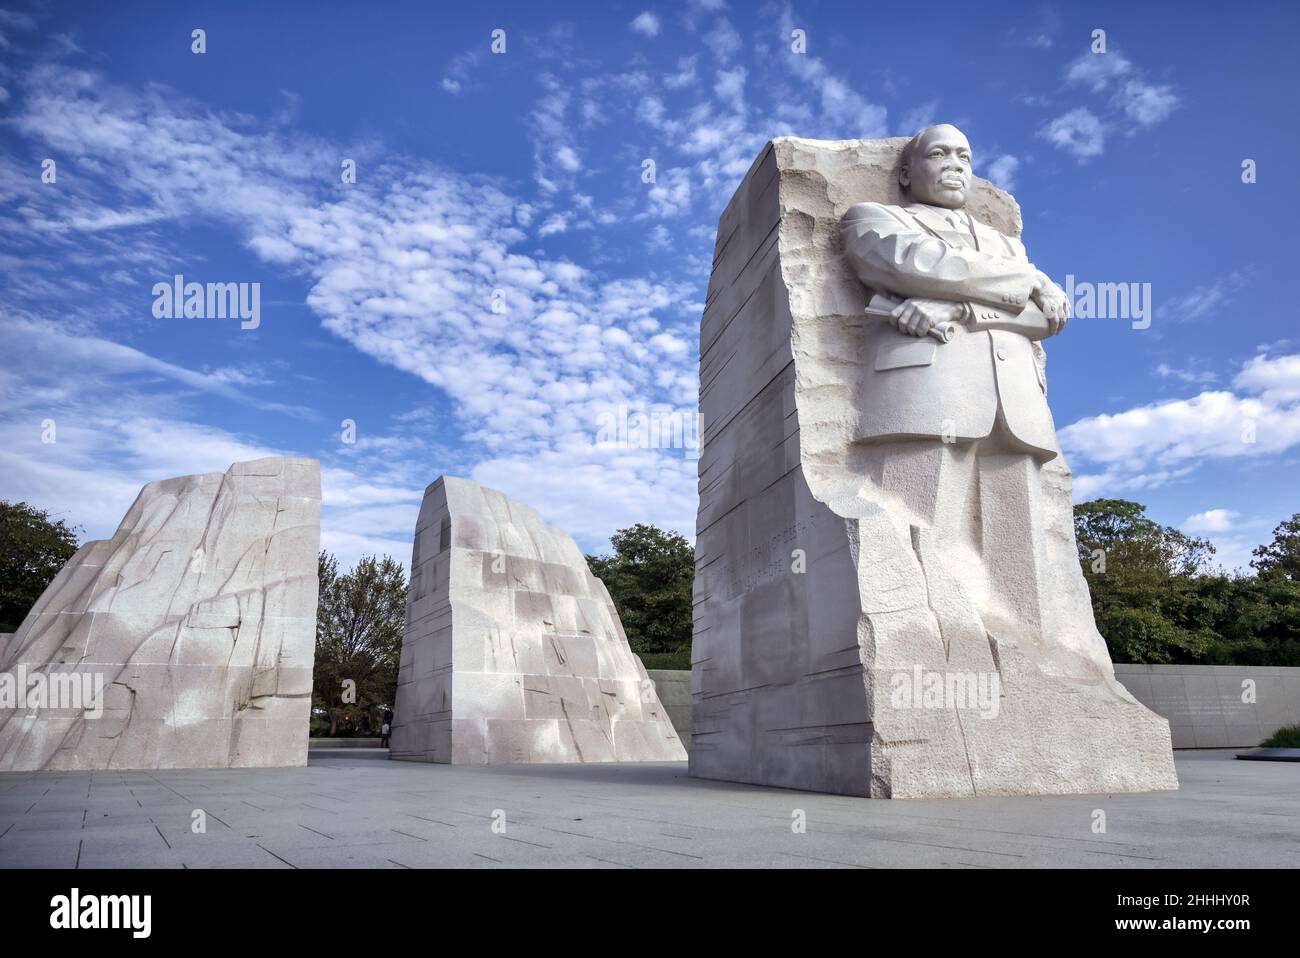 Washington DC, USA - October 15, 2021: The Martin Luther King Jr. Memorial on the National Mall in Washington DC. Stock Photo